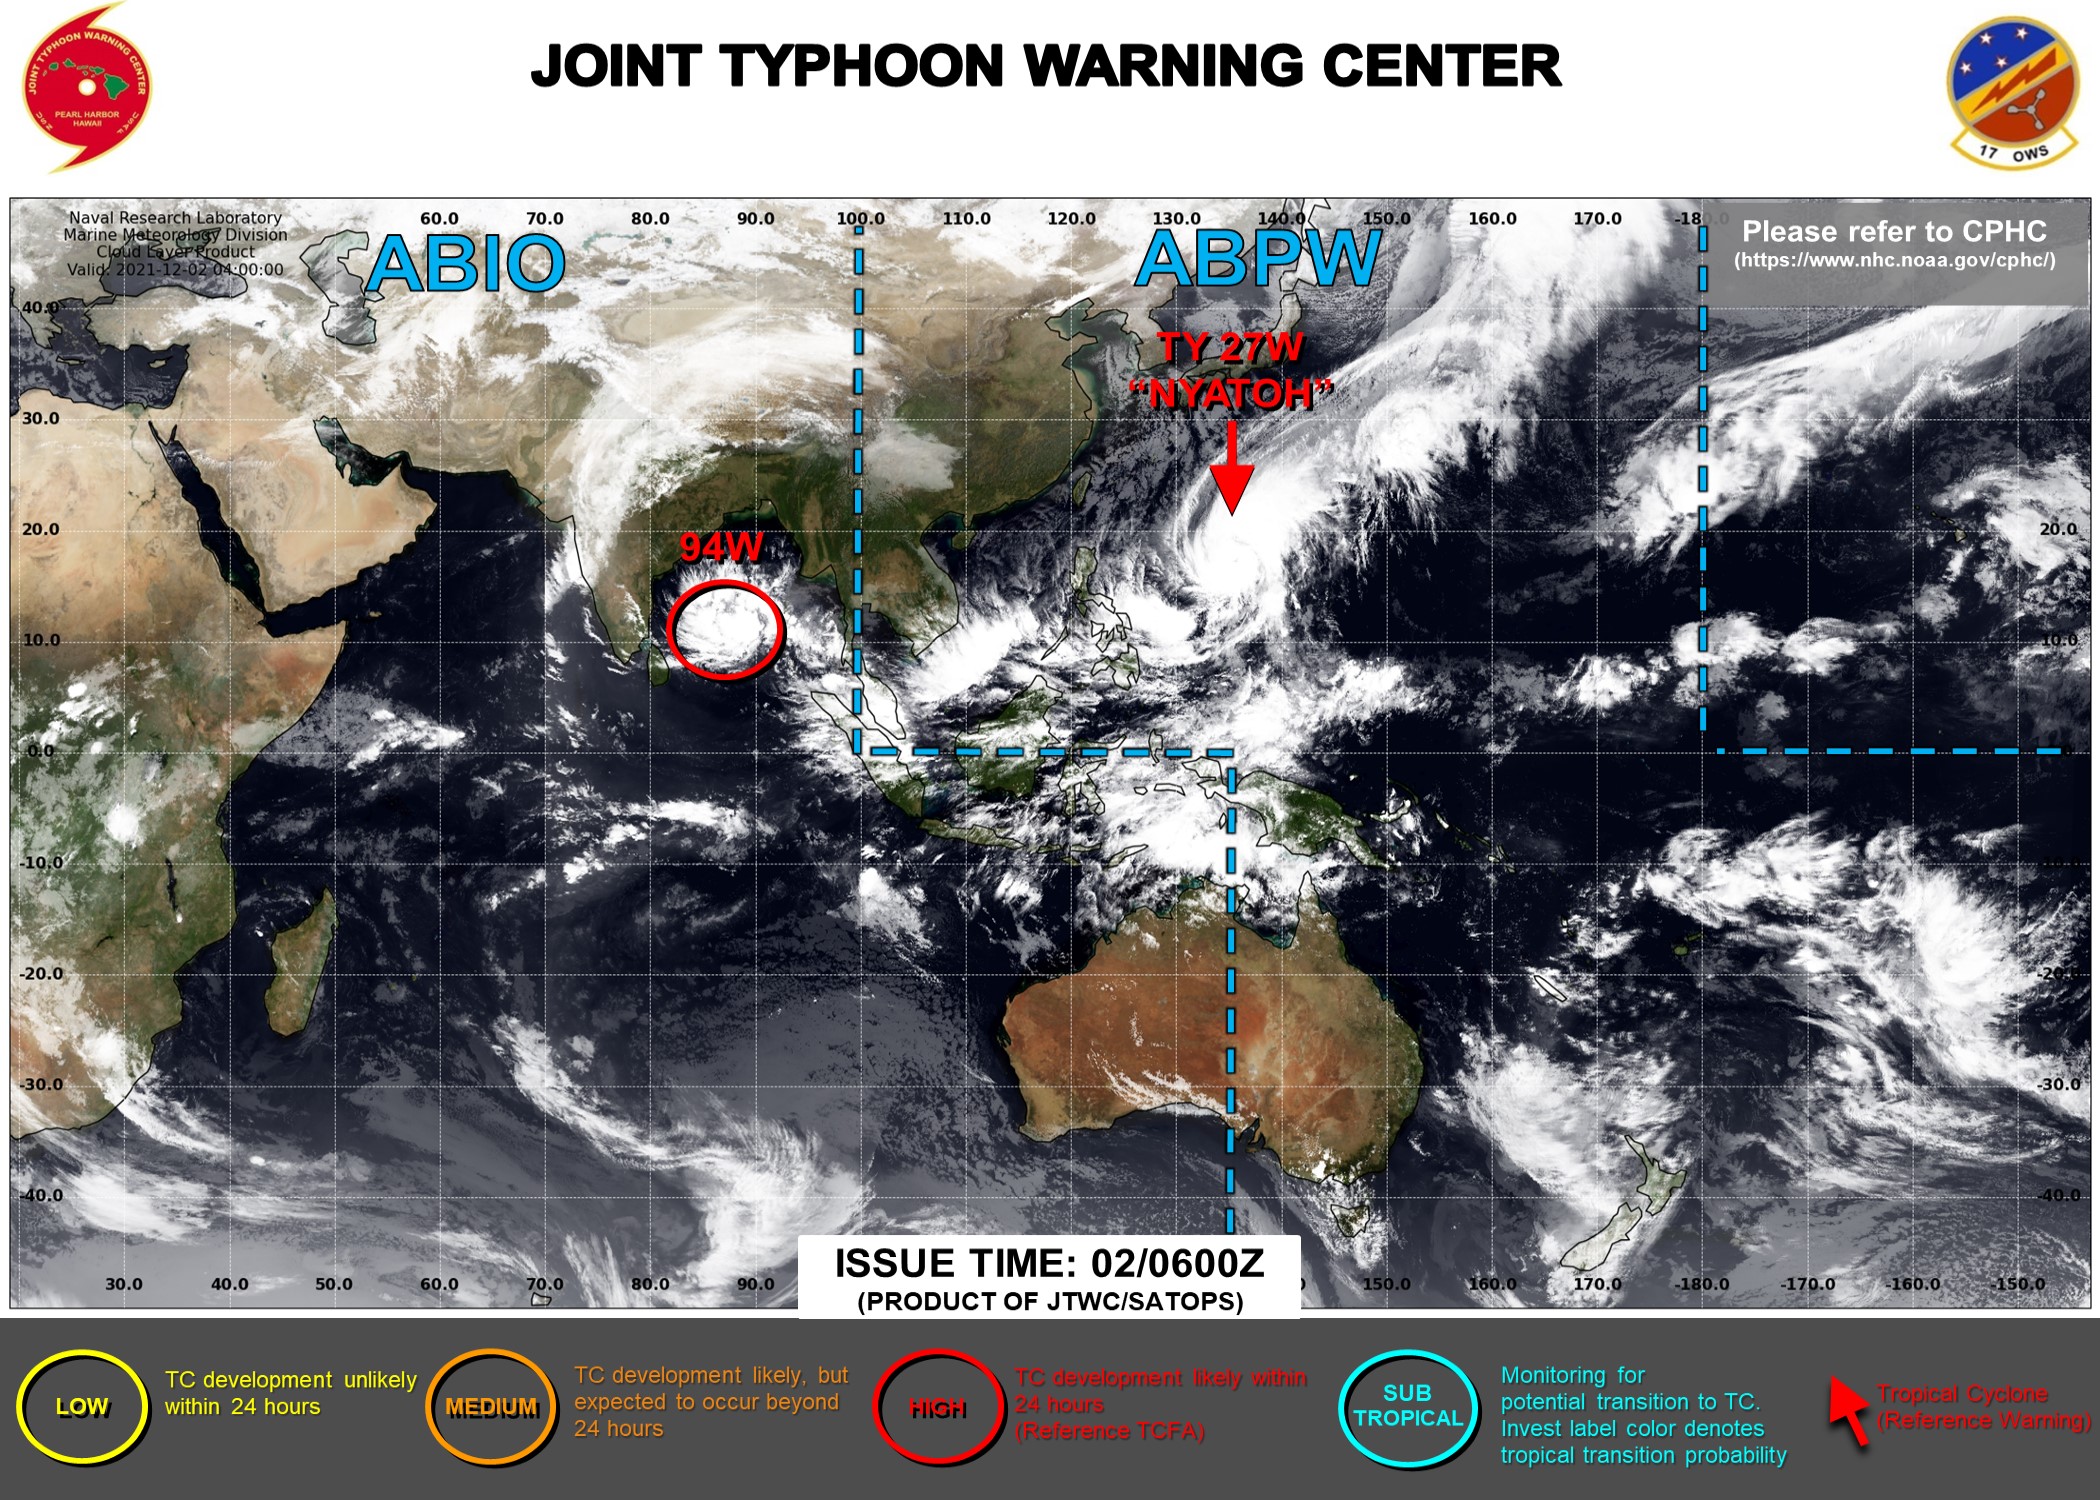 JTWC IS ISSUING 6HOURLY WARNINGS ON TY 27W(NYATOH). WARNING 2/FINAL WAS ISSUED ON TC 02S(TERATAI) AT 01/21UTC. 3HOURLY SATELLITE BULLETINS ARE ISSUED ON 27W,02S AND 94W.